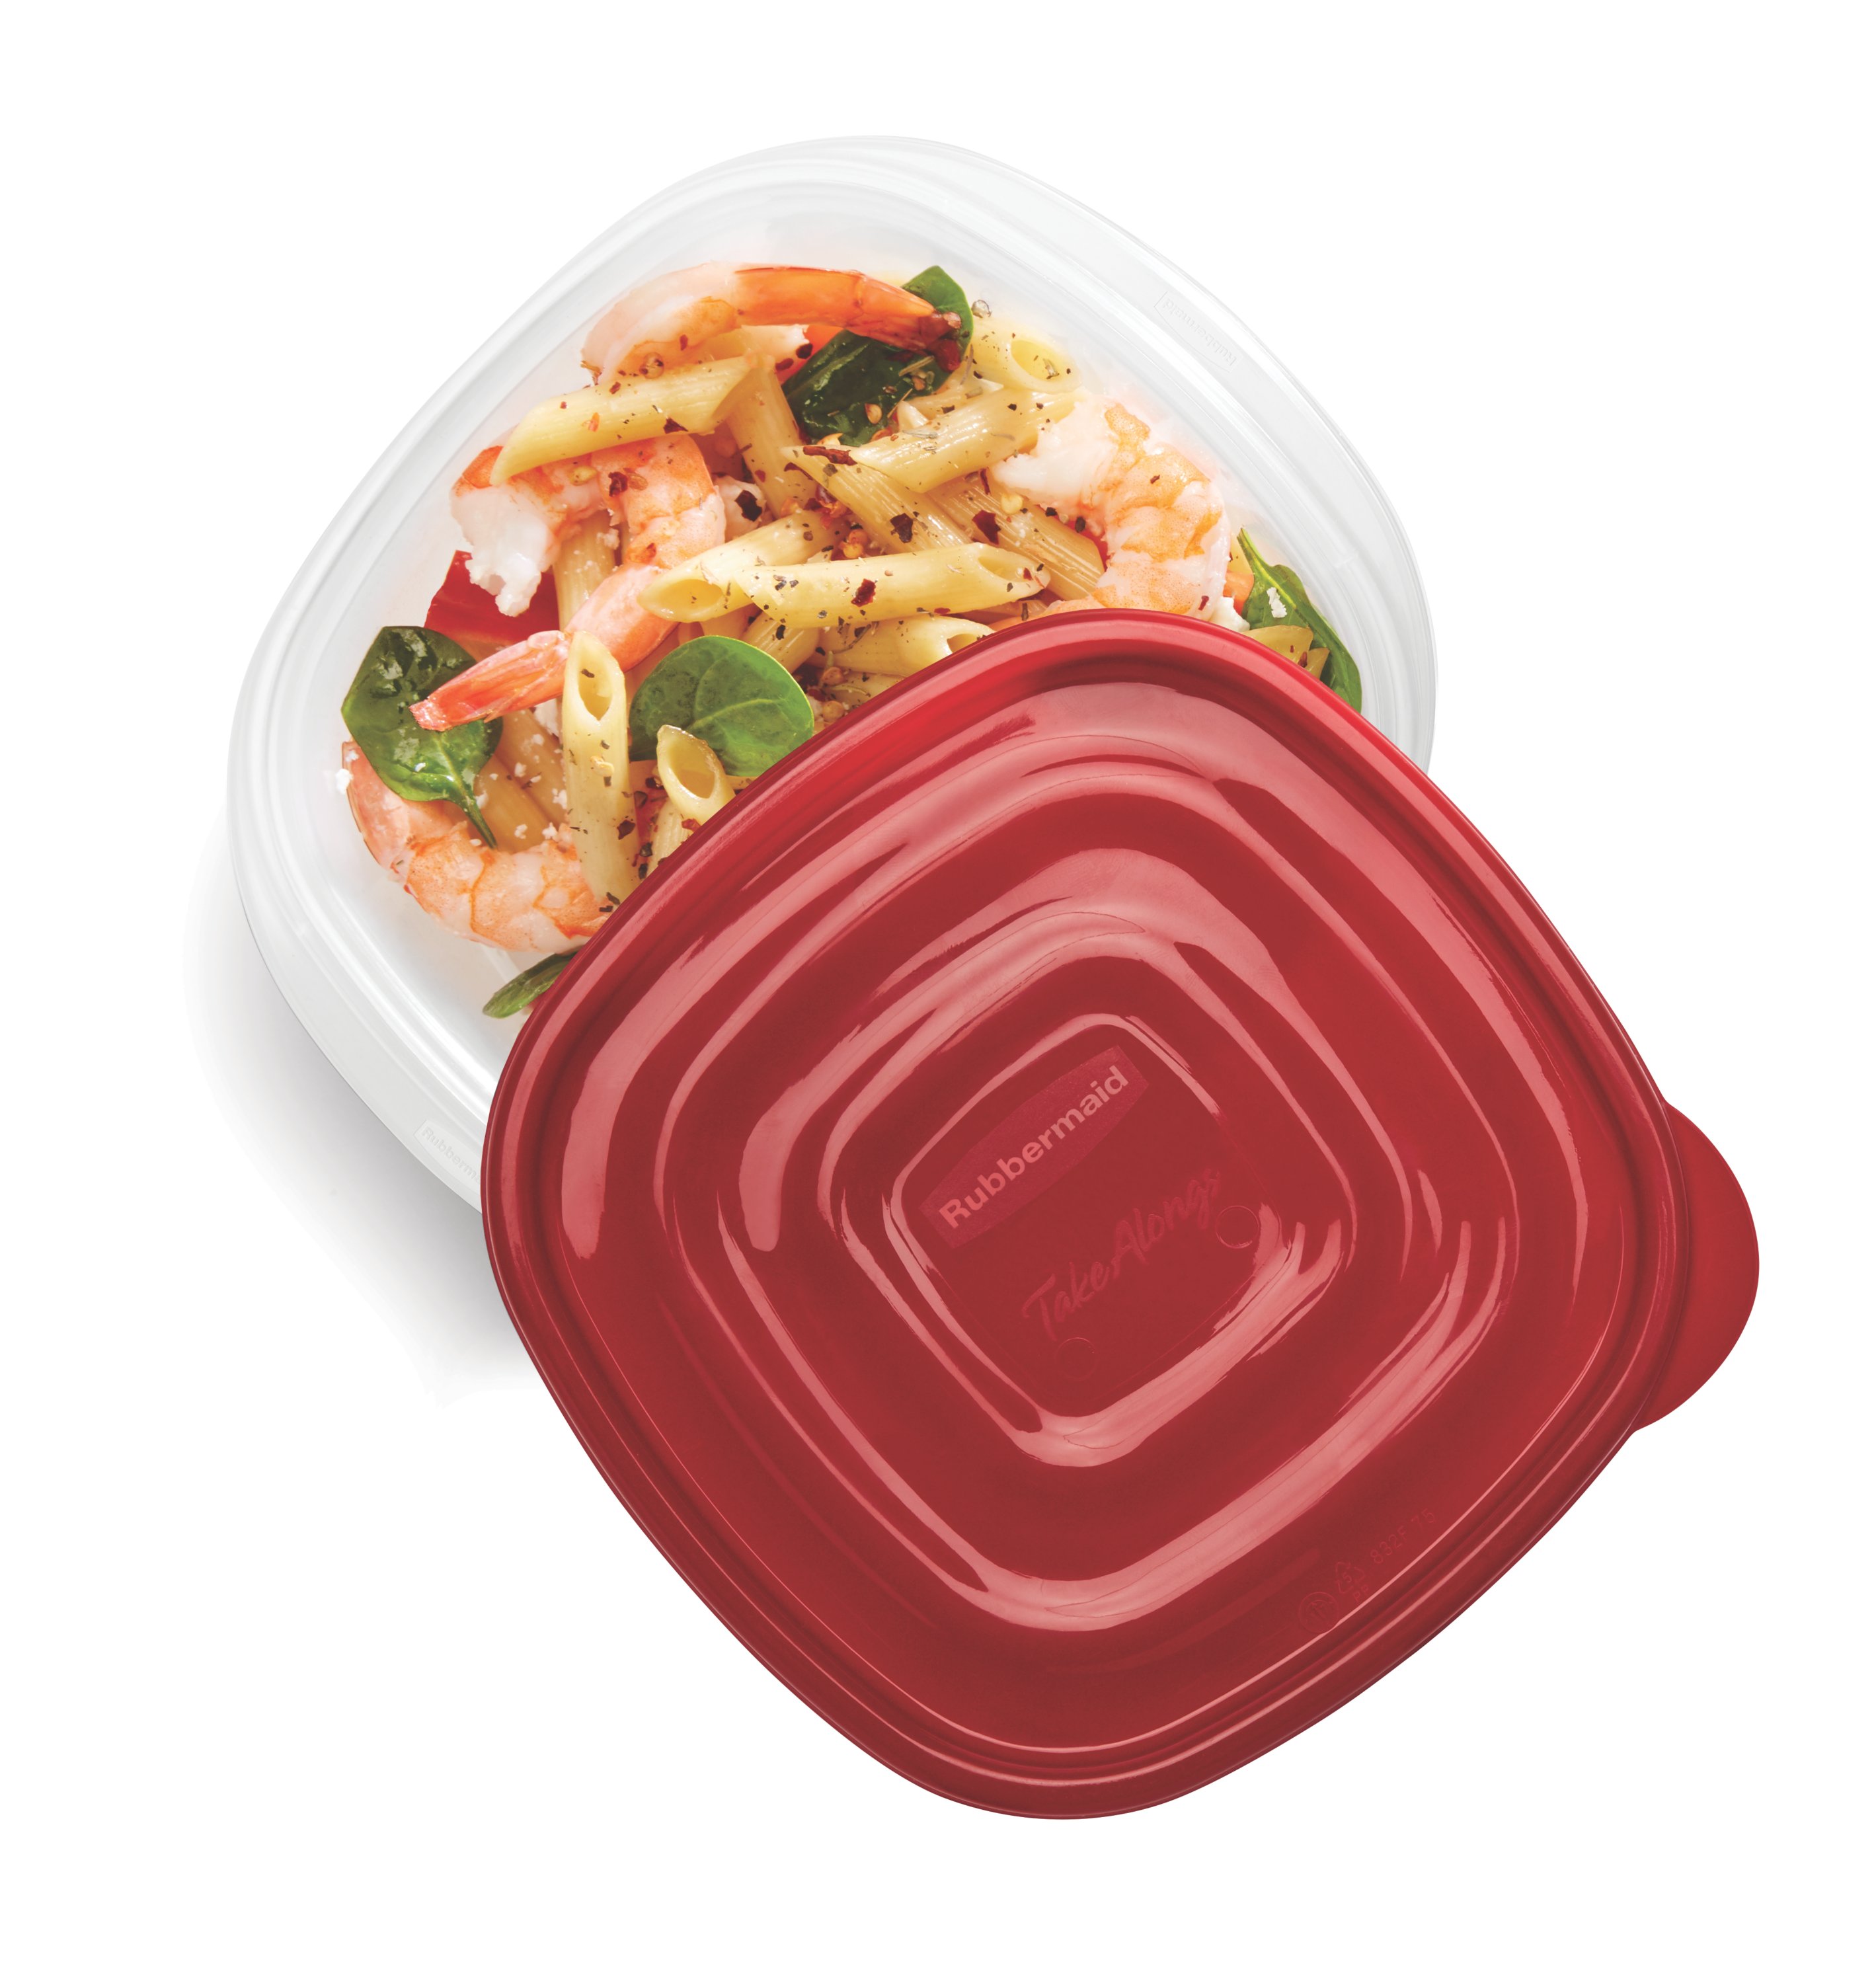 Rubbermaid Containers with Lids, Deep Square, 5.2 Cups